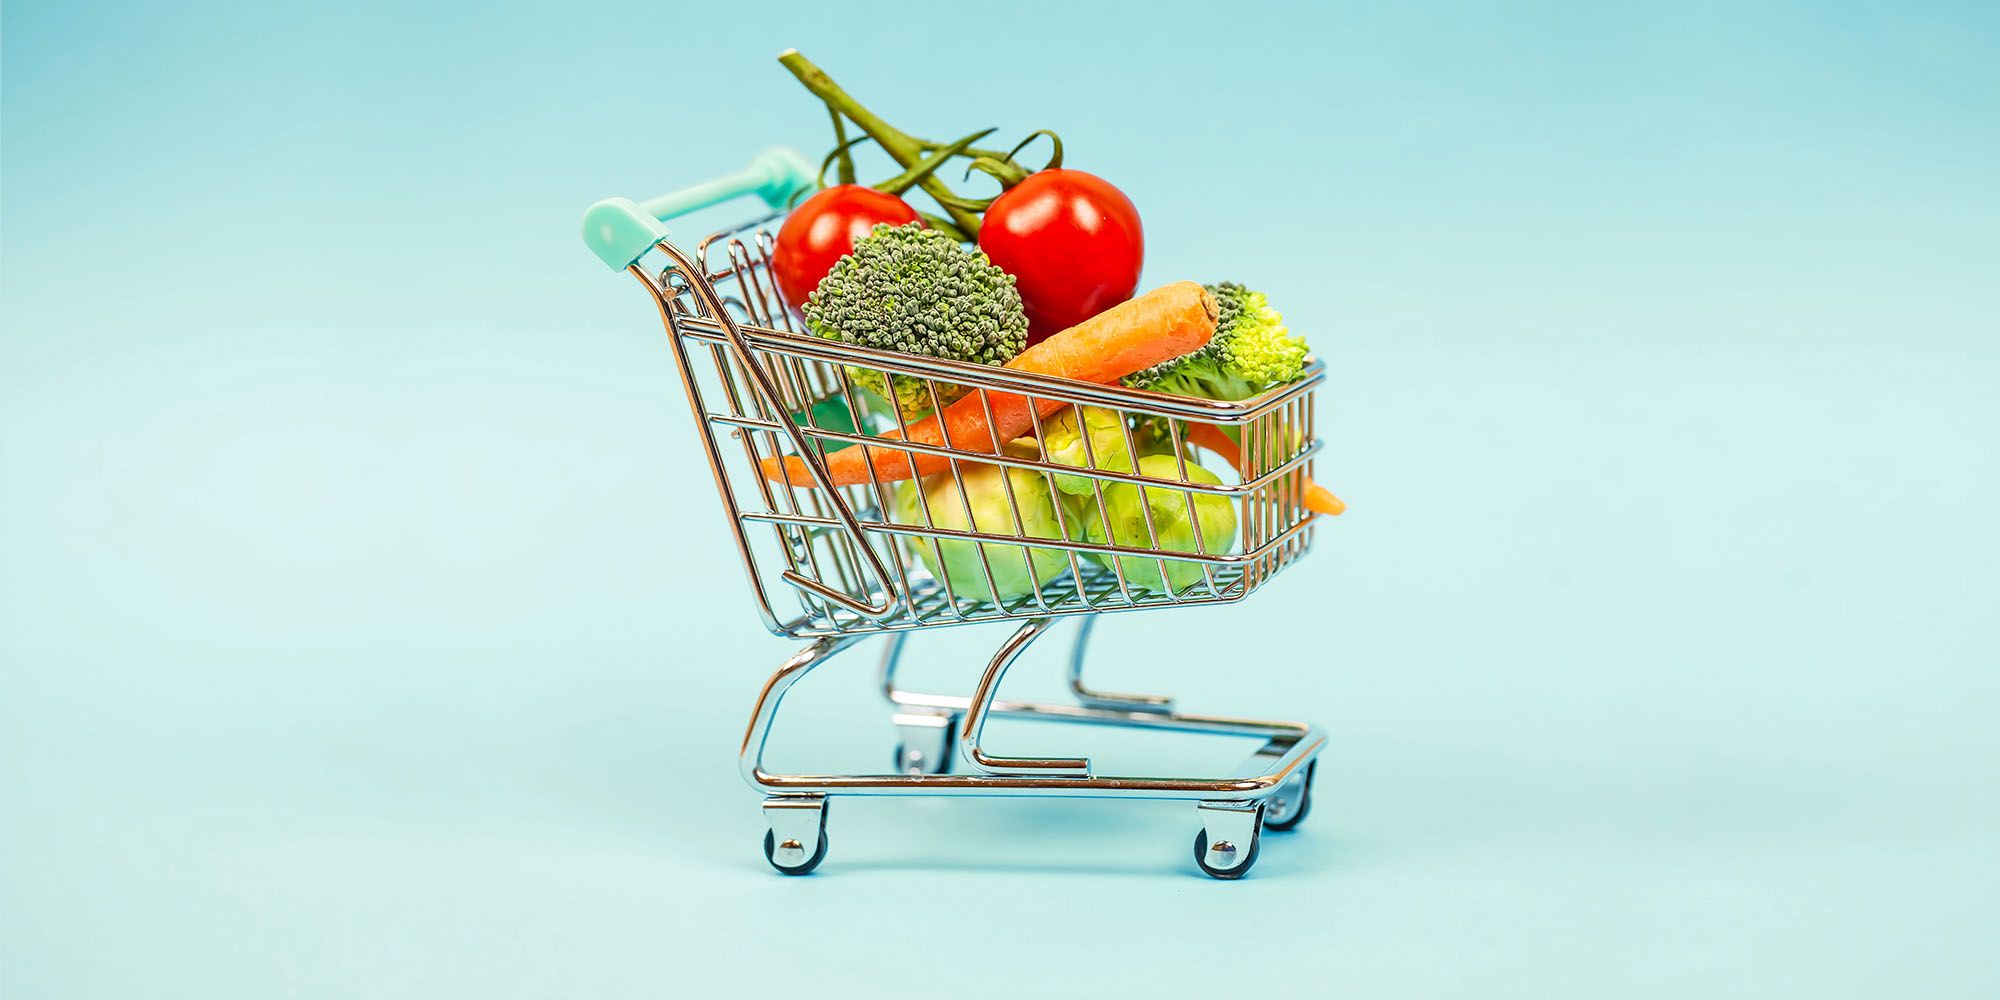 How to Find the Best Online Grocery Order Handle